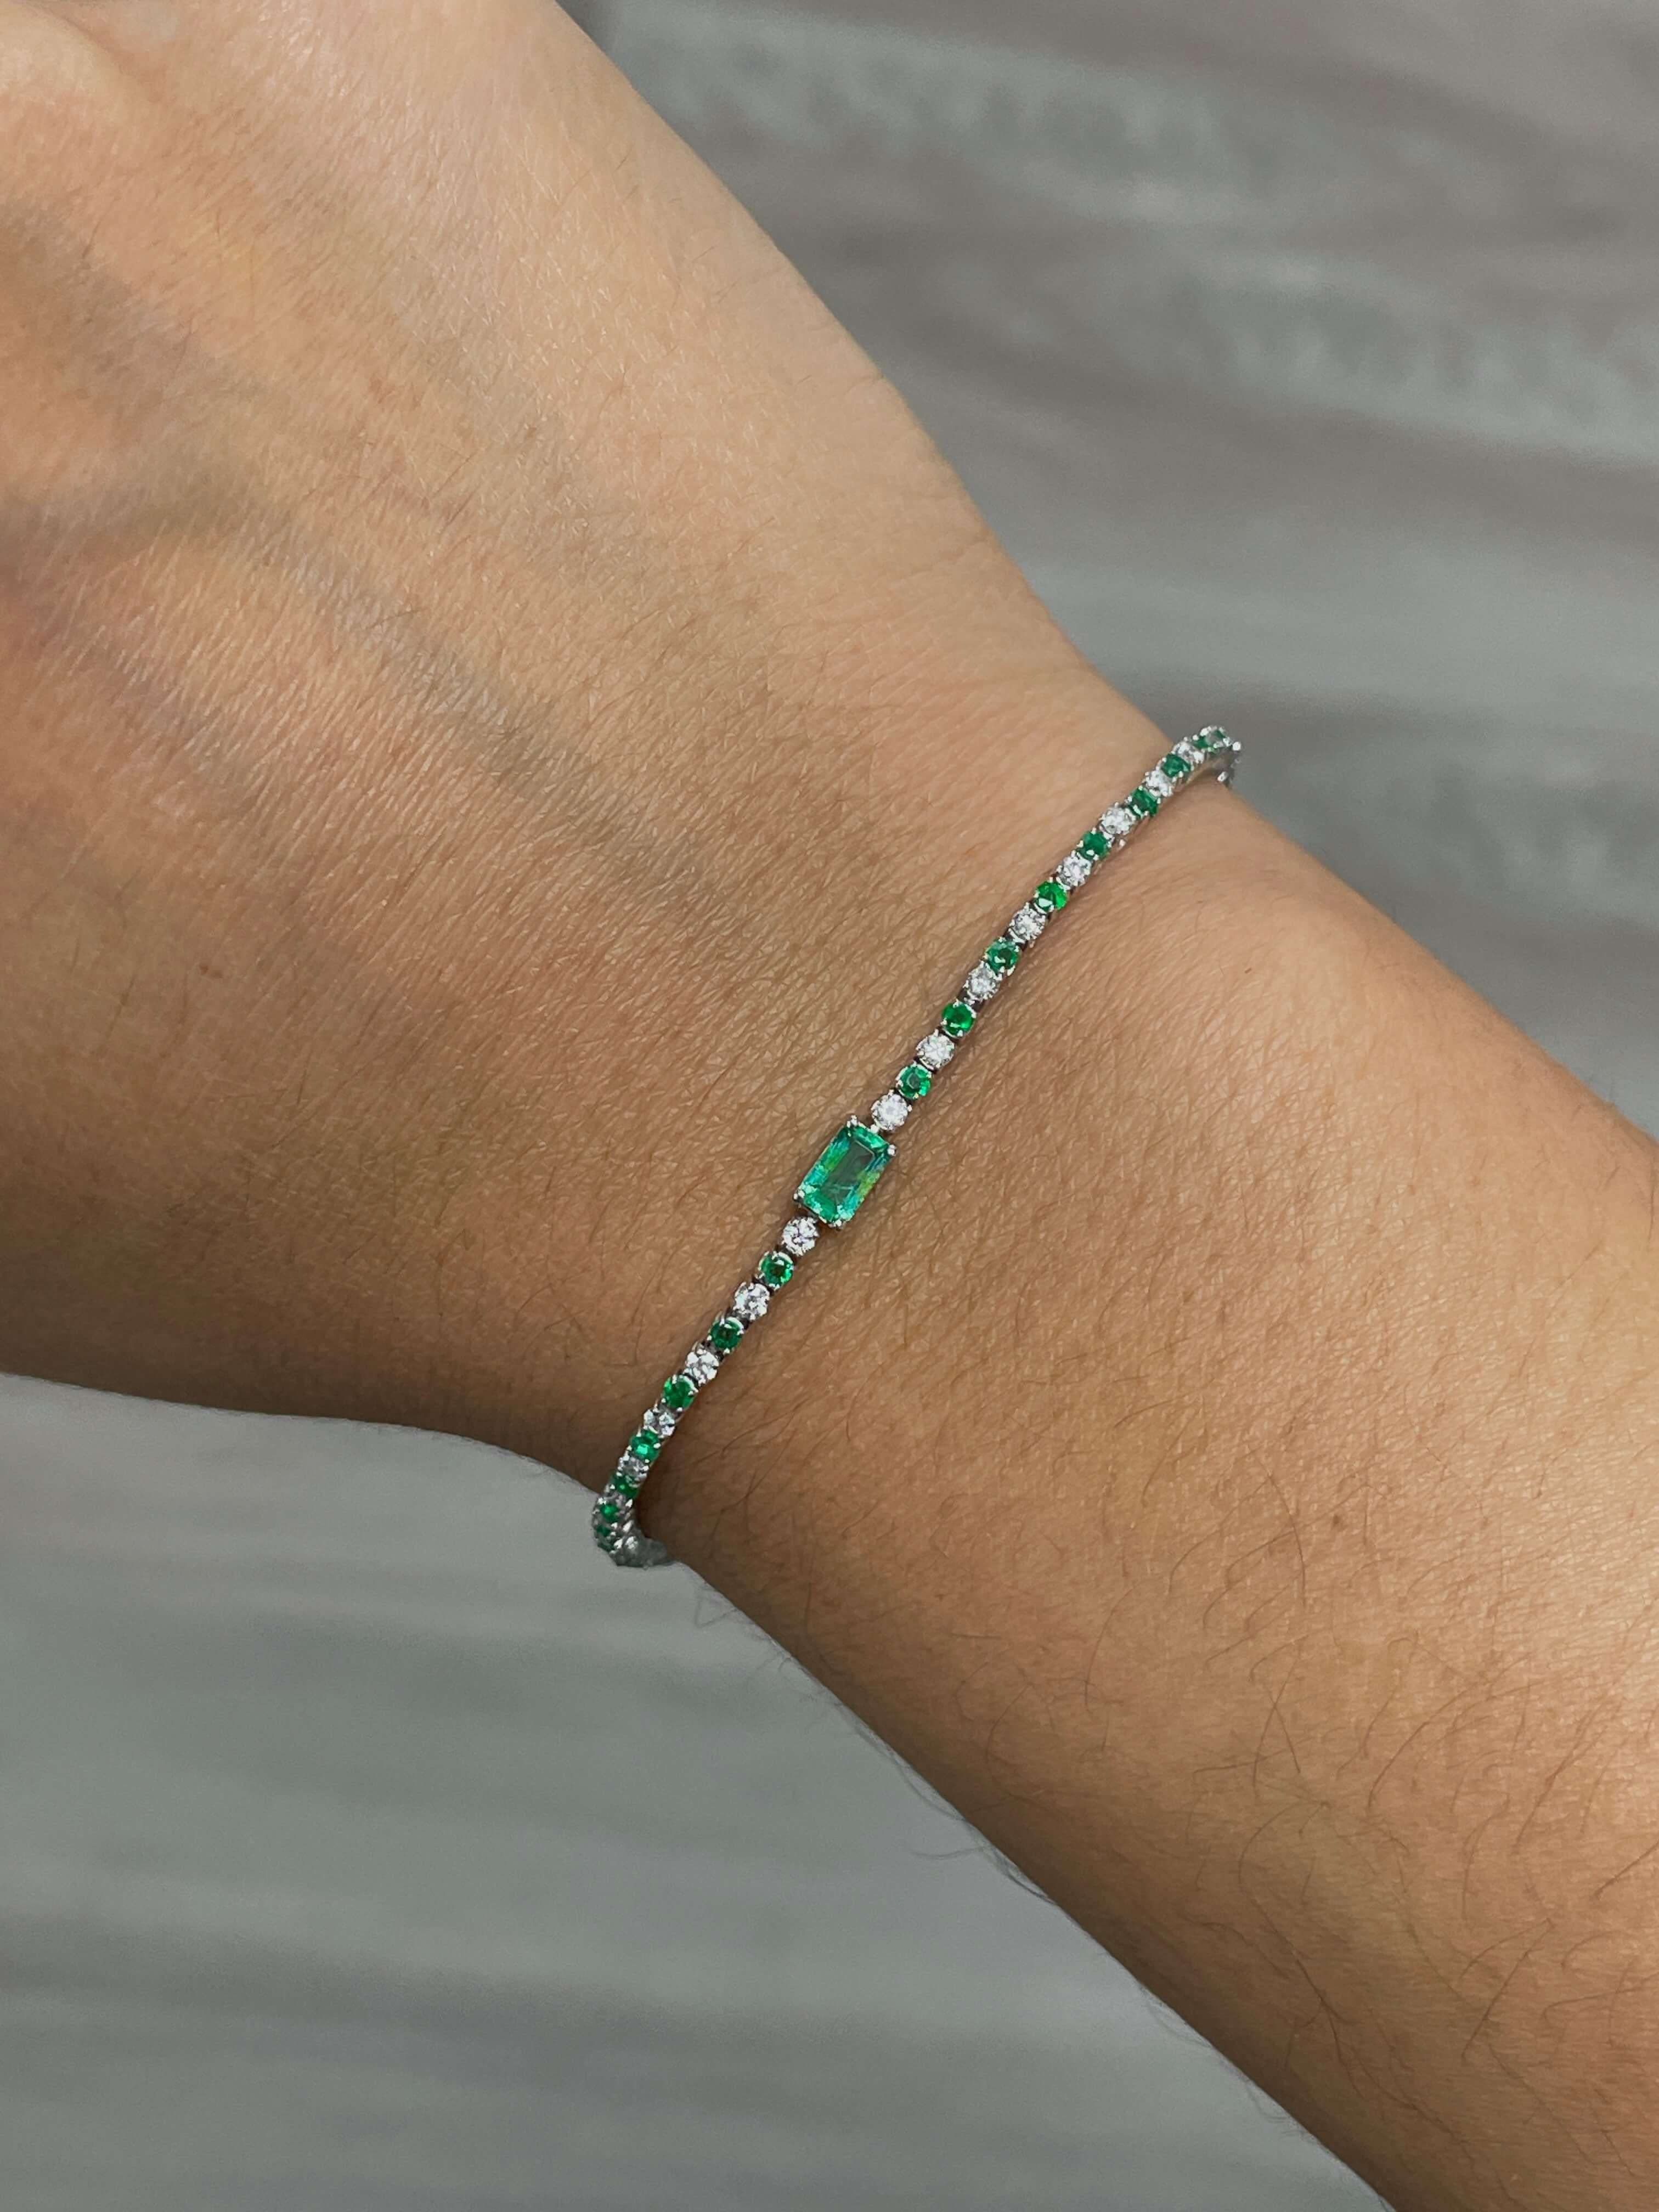 Add a pop of color to your everyday wardrobe with this emerald and diamond bracelet featuring a beautiful emerald center stone and alternating round diamonds and emeralds. Available in two center stone sizes, 7x5 and 5x3.

14K White Gold Emerald and